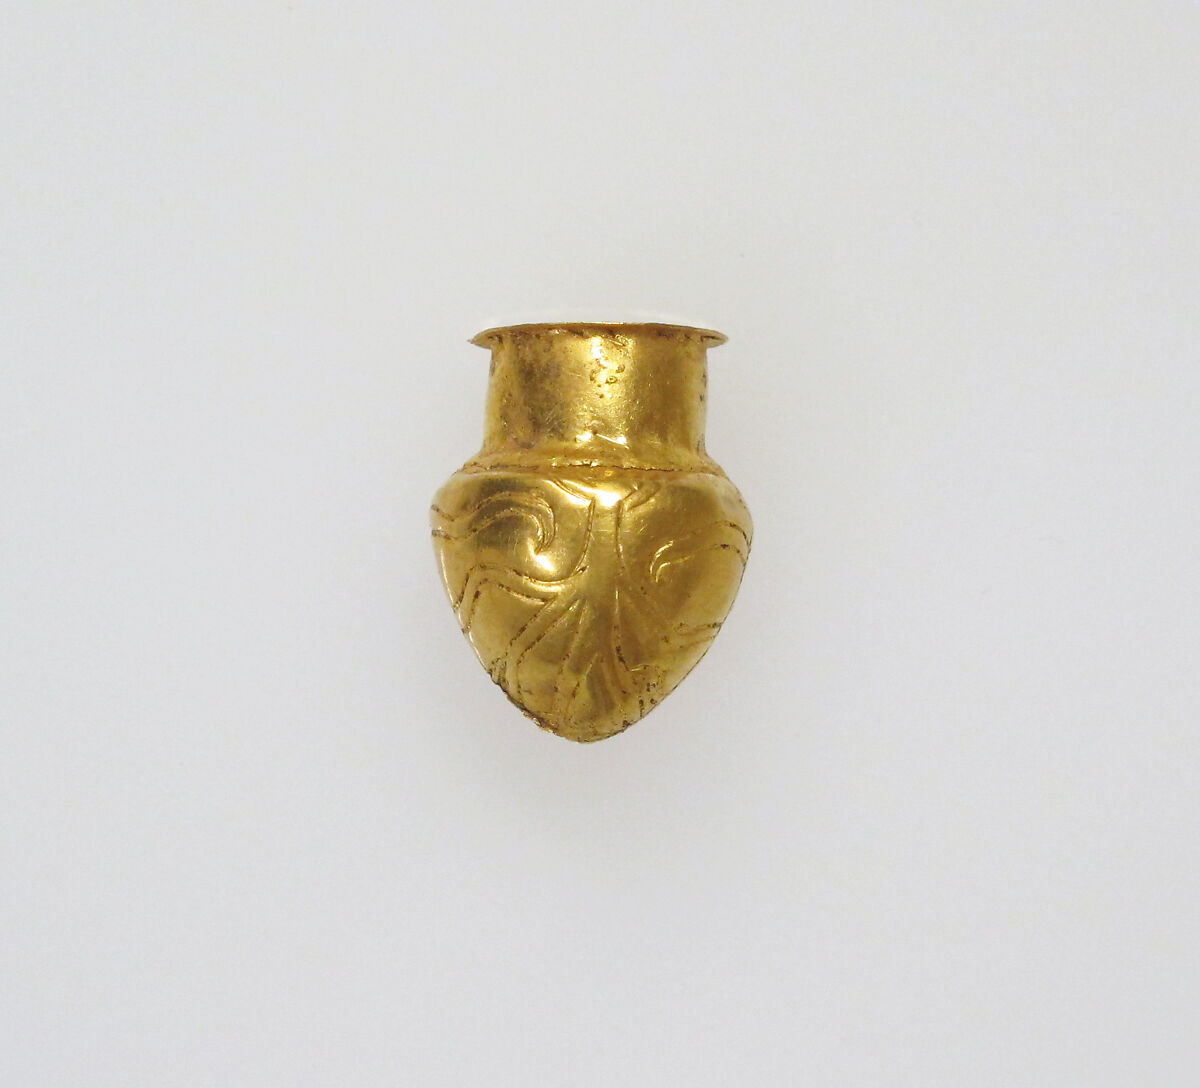 Rattle in the form of a vessel, Gold, Greek 